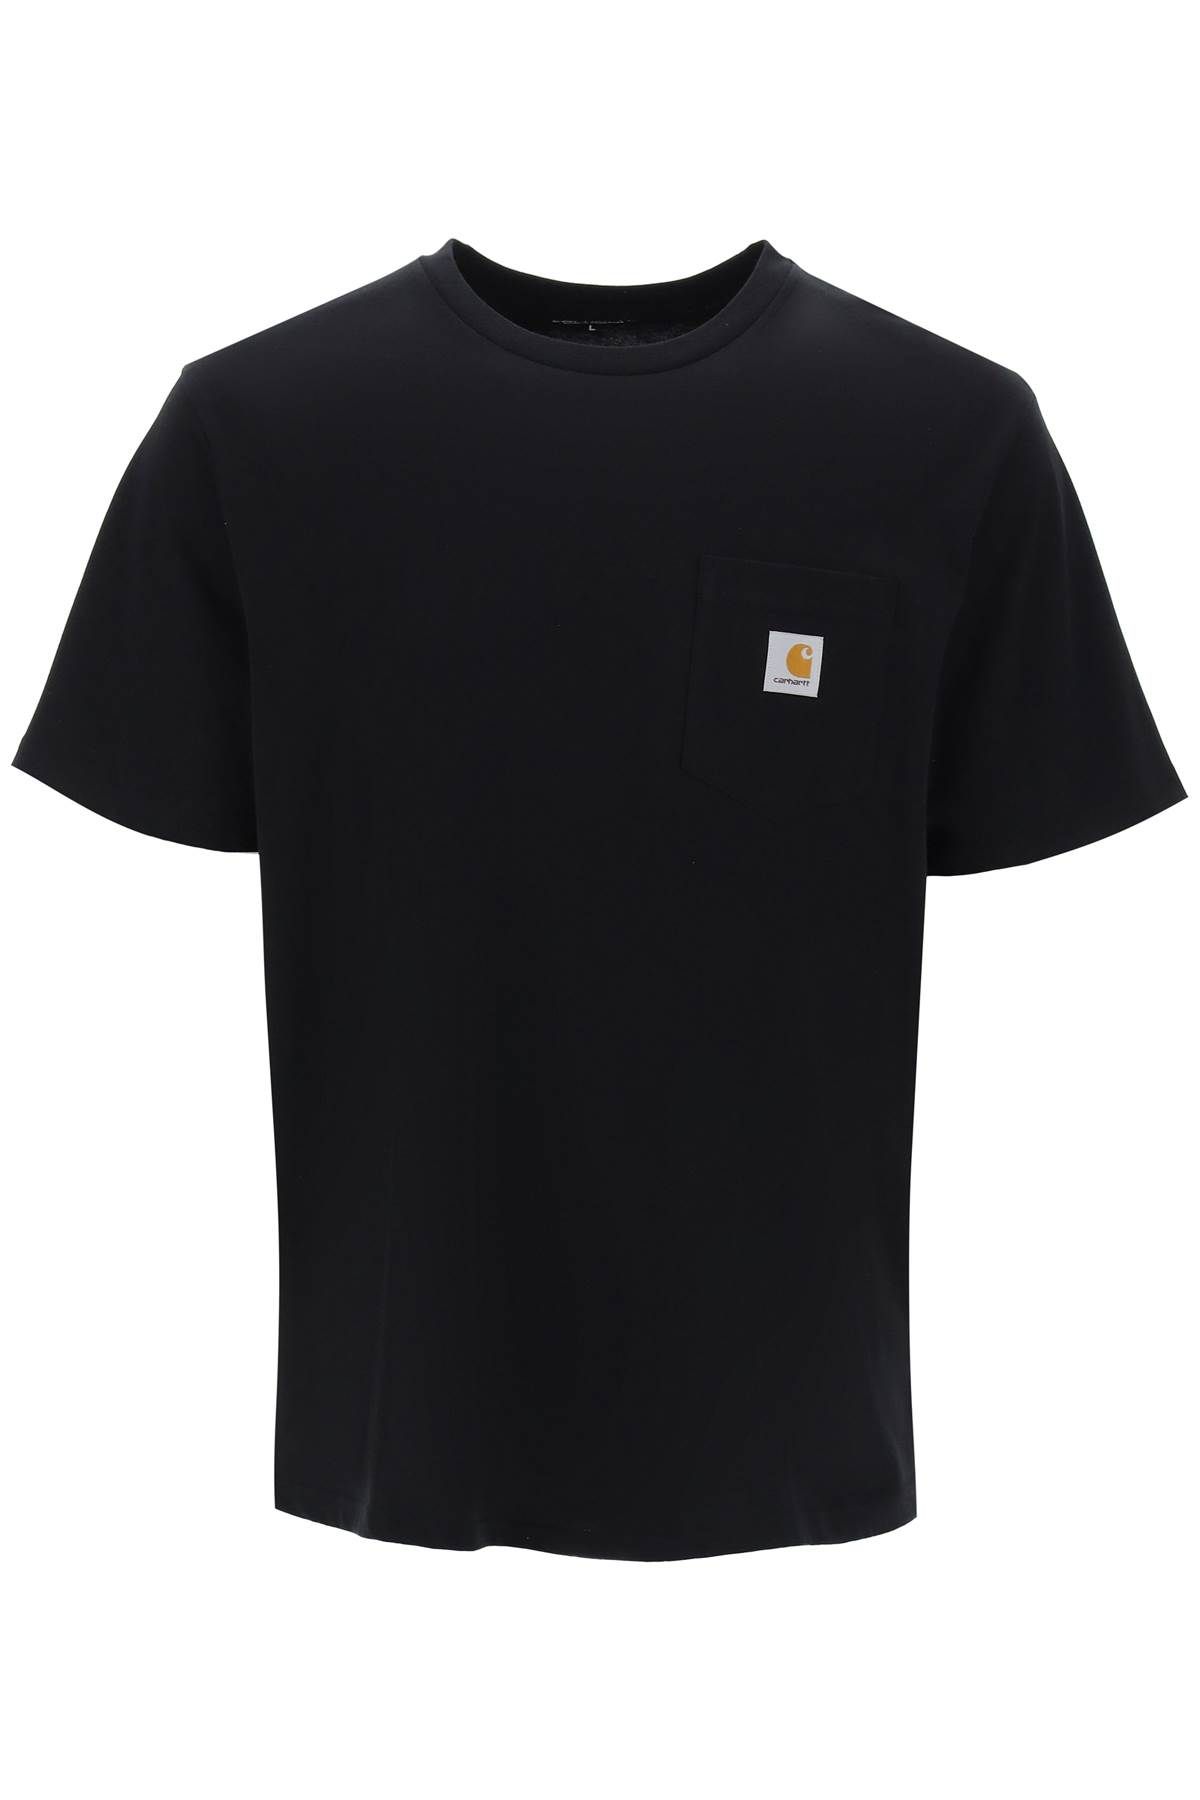 Carhartt WIP CARHARTT WIP t-shirt with chest pocket